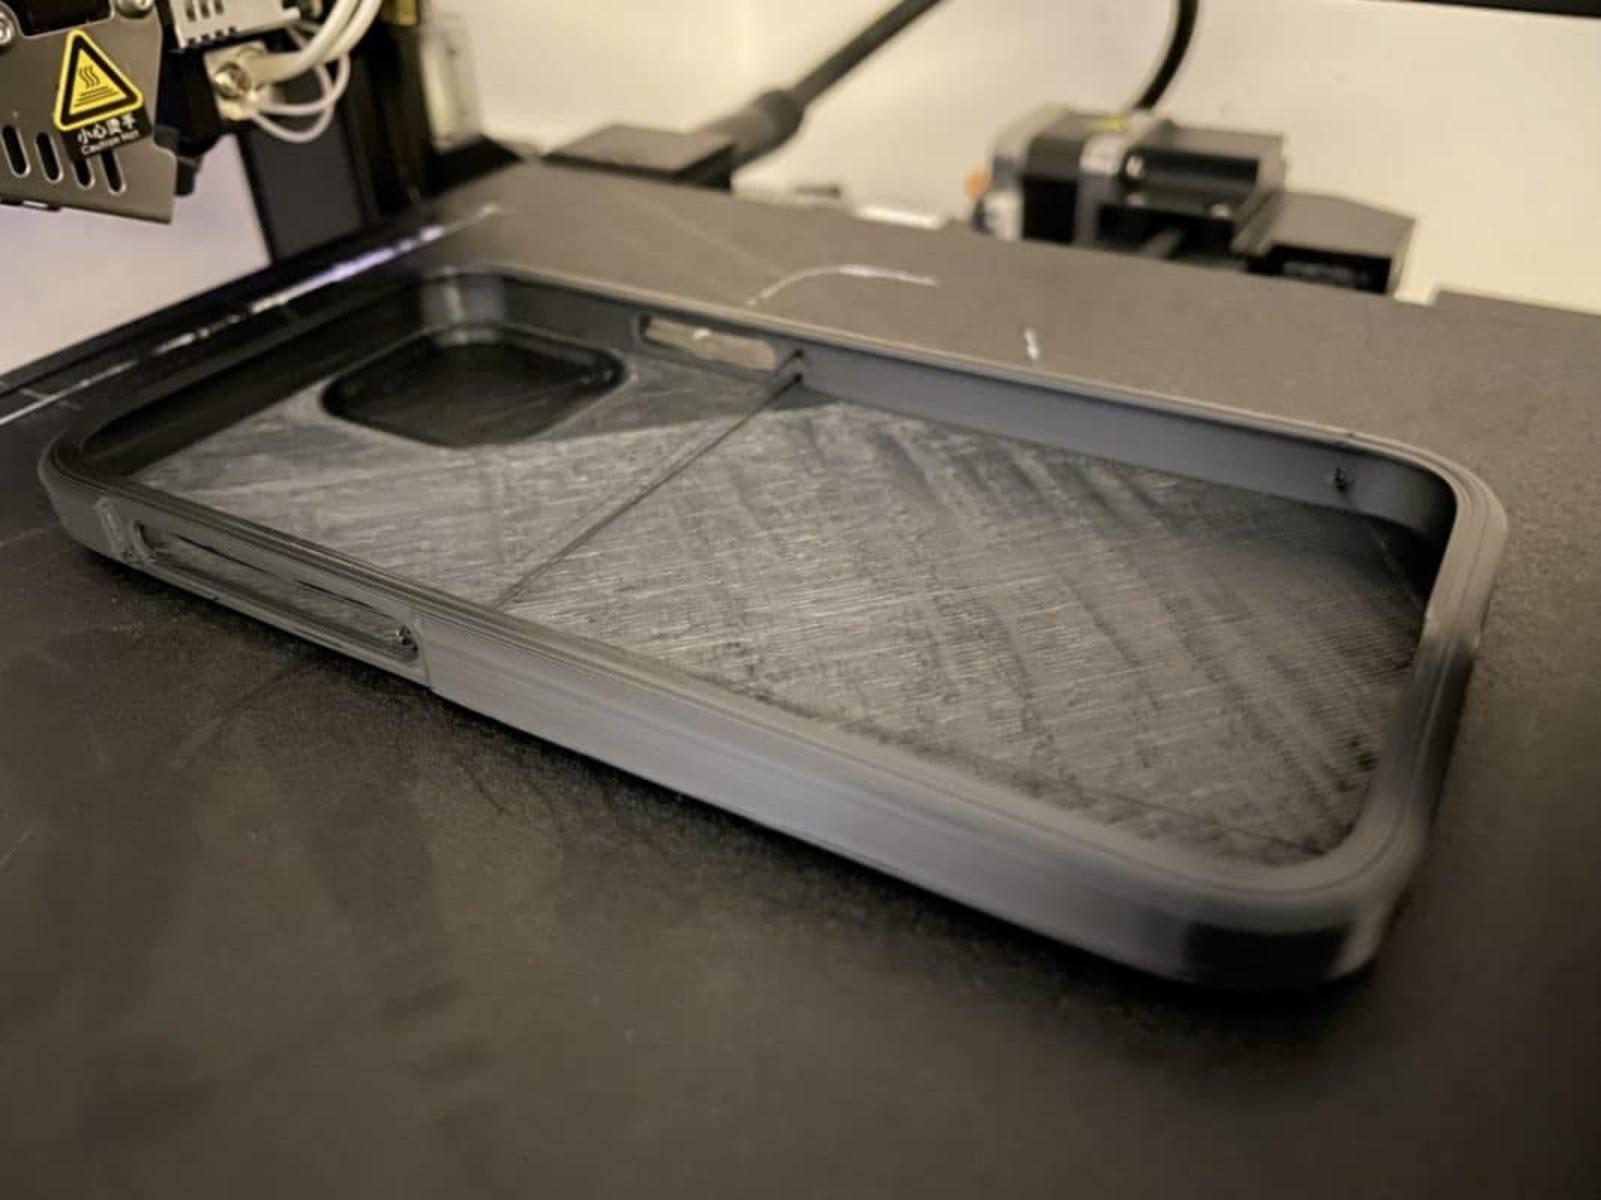 How To Make A Phone Case With A 3D Printer